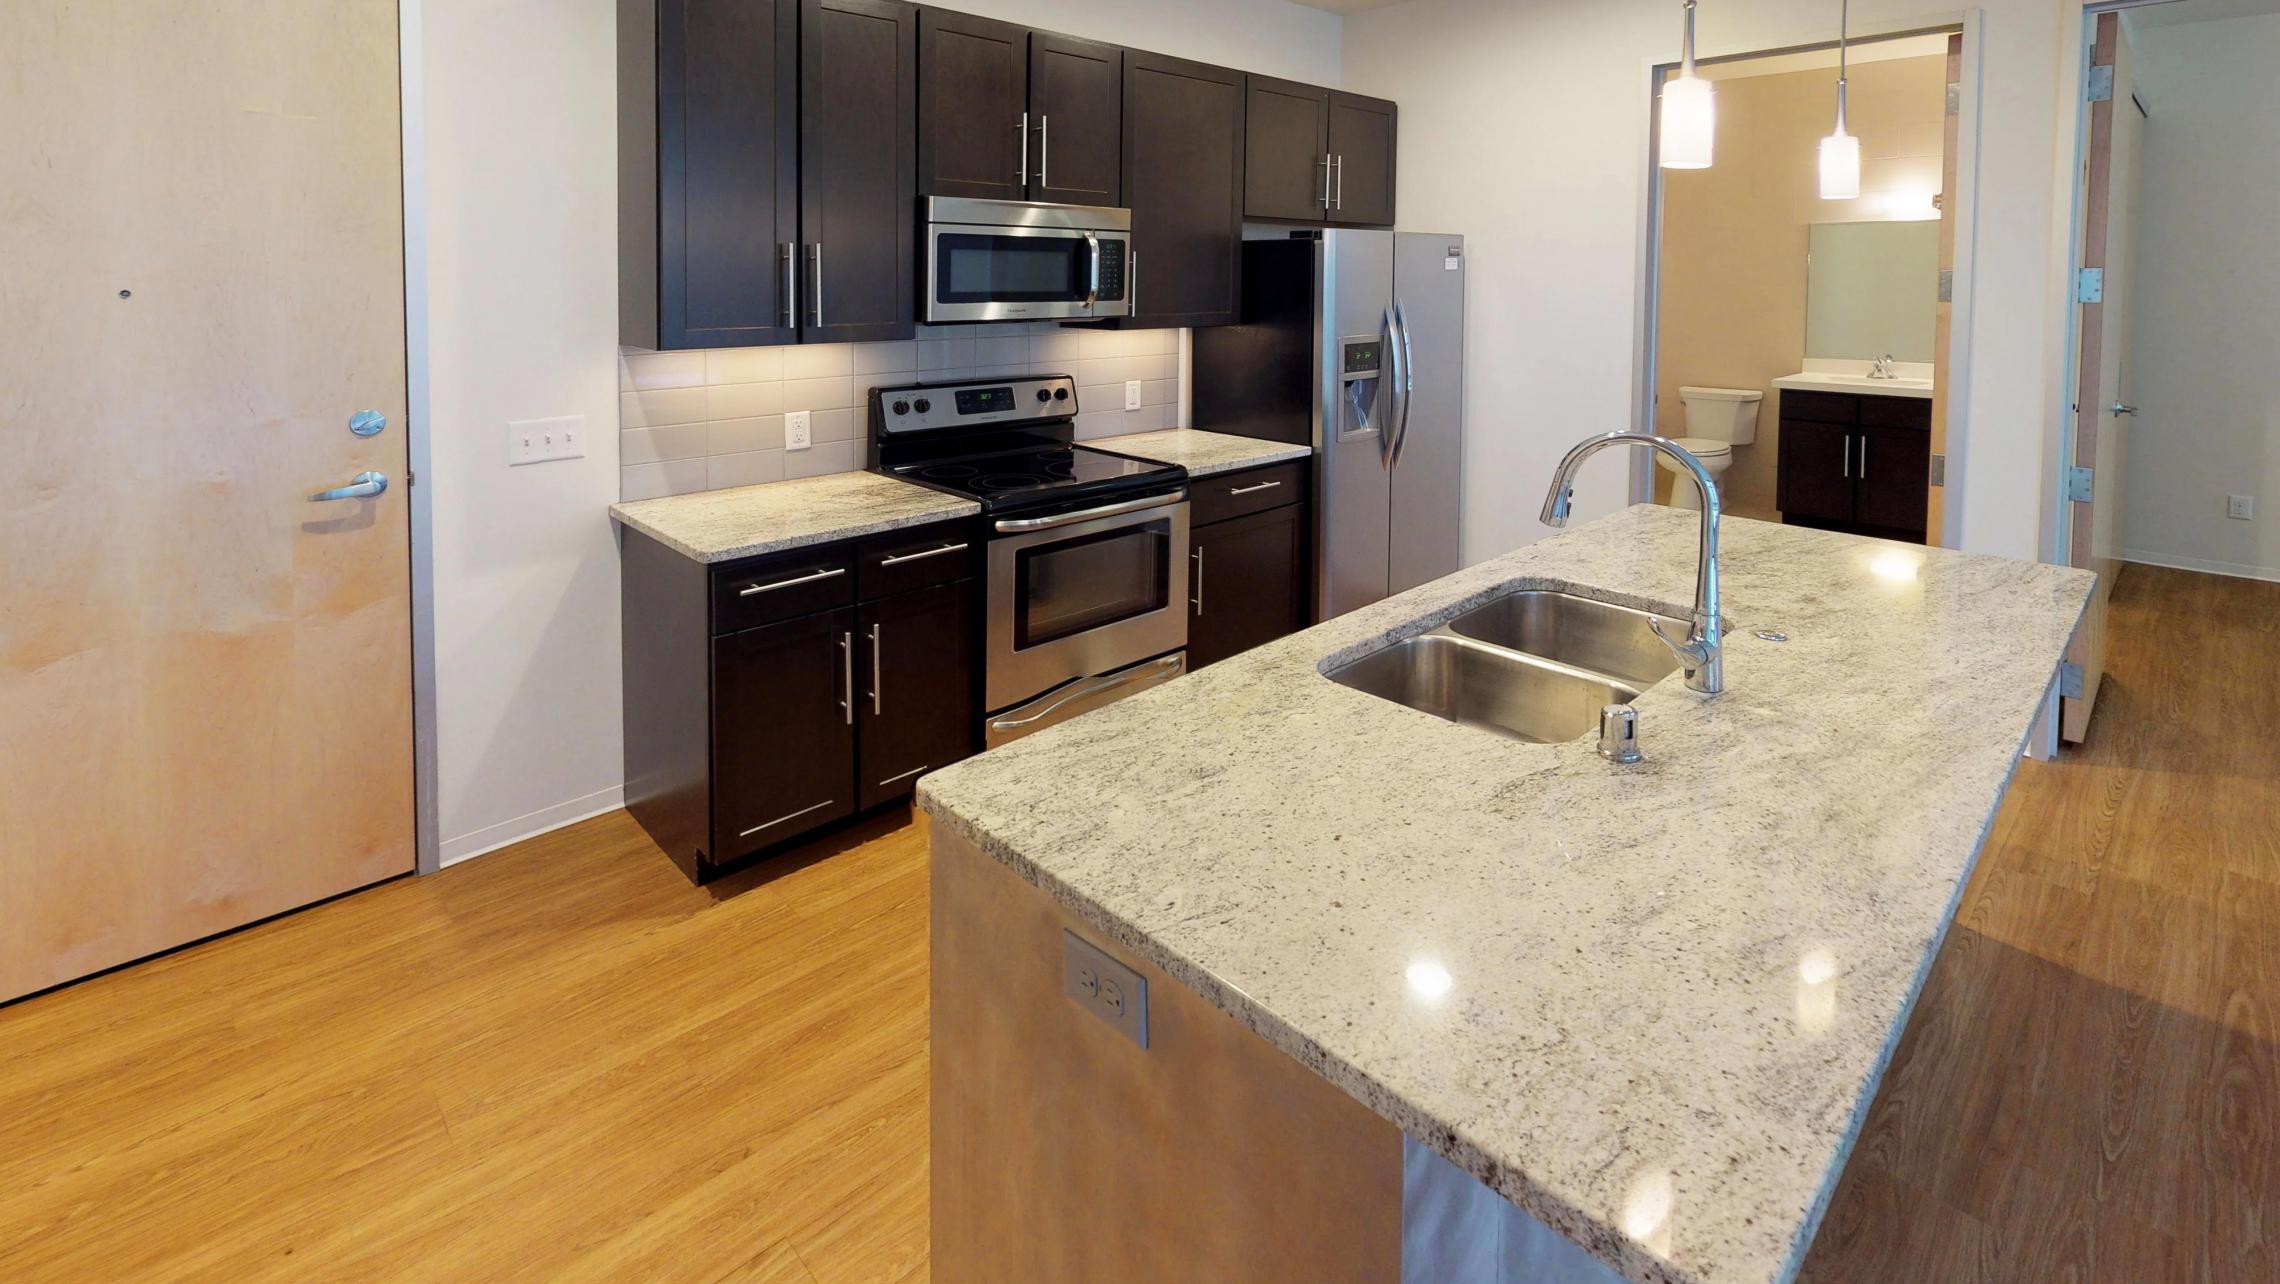 Capitol-Hill-500-kitchen-one bedroom-capitol view-downtown-luxury-modern.jpg